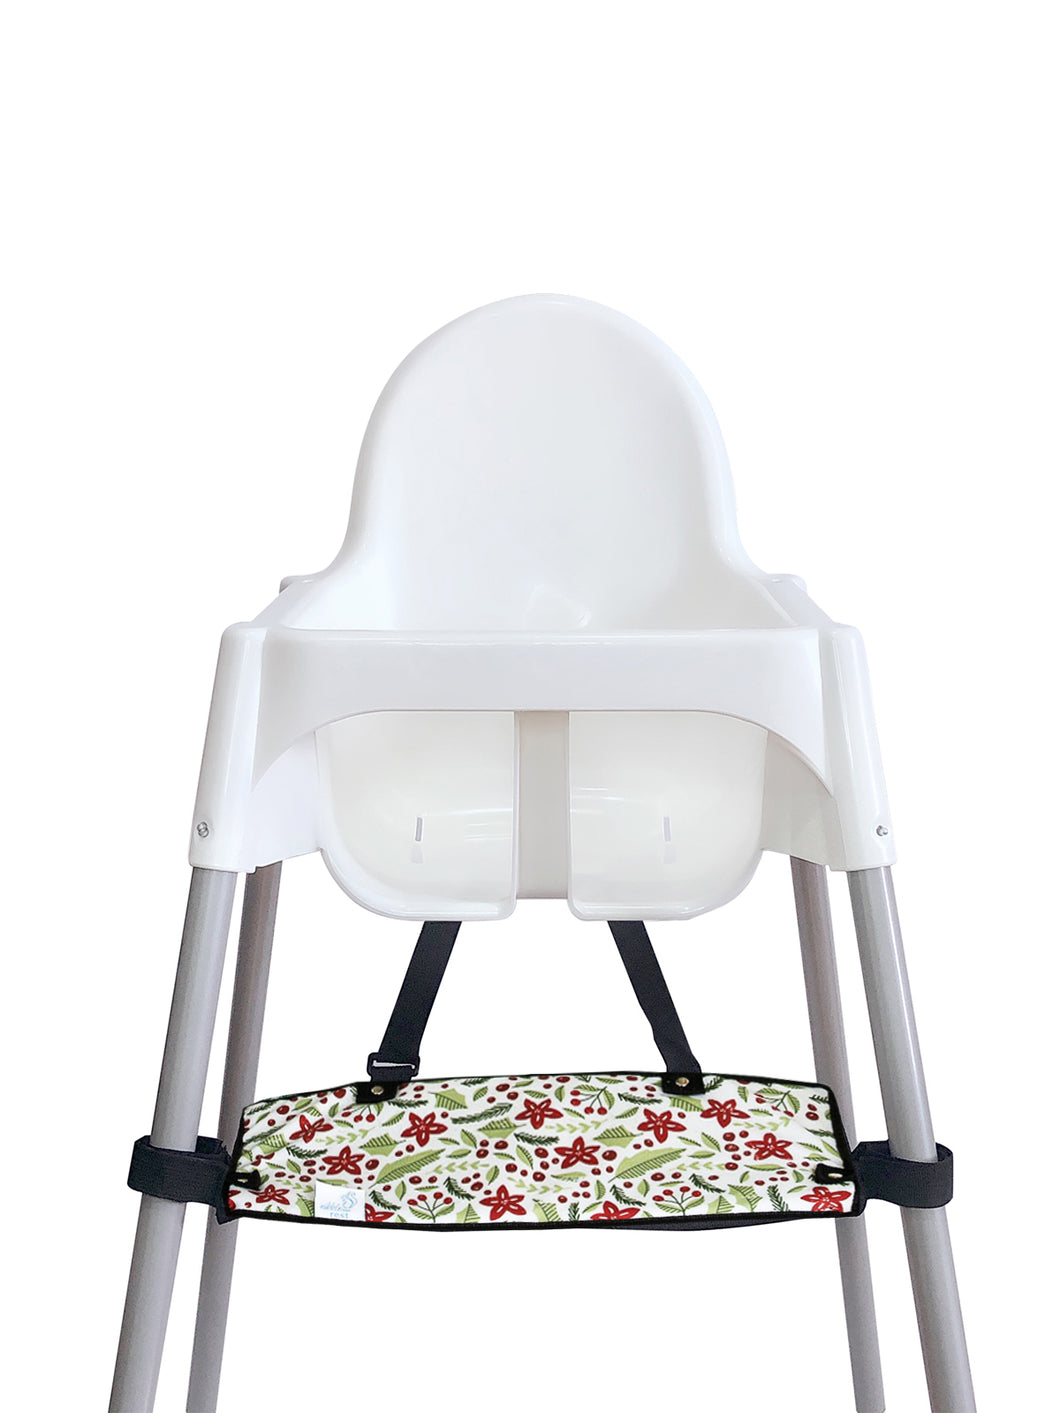 Footsi® High Chair Footrest - Merry & Bright - mytinyfingers baby products